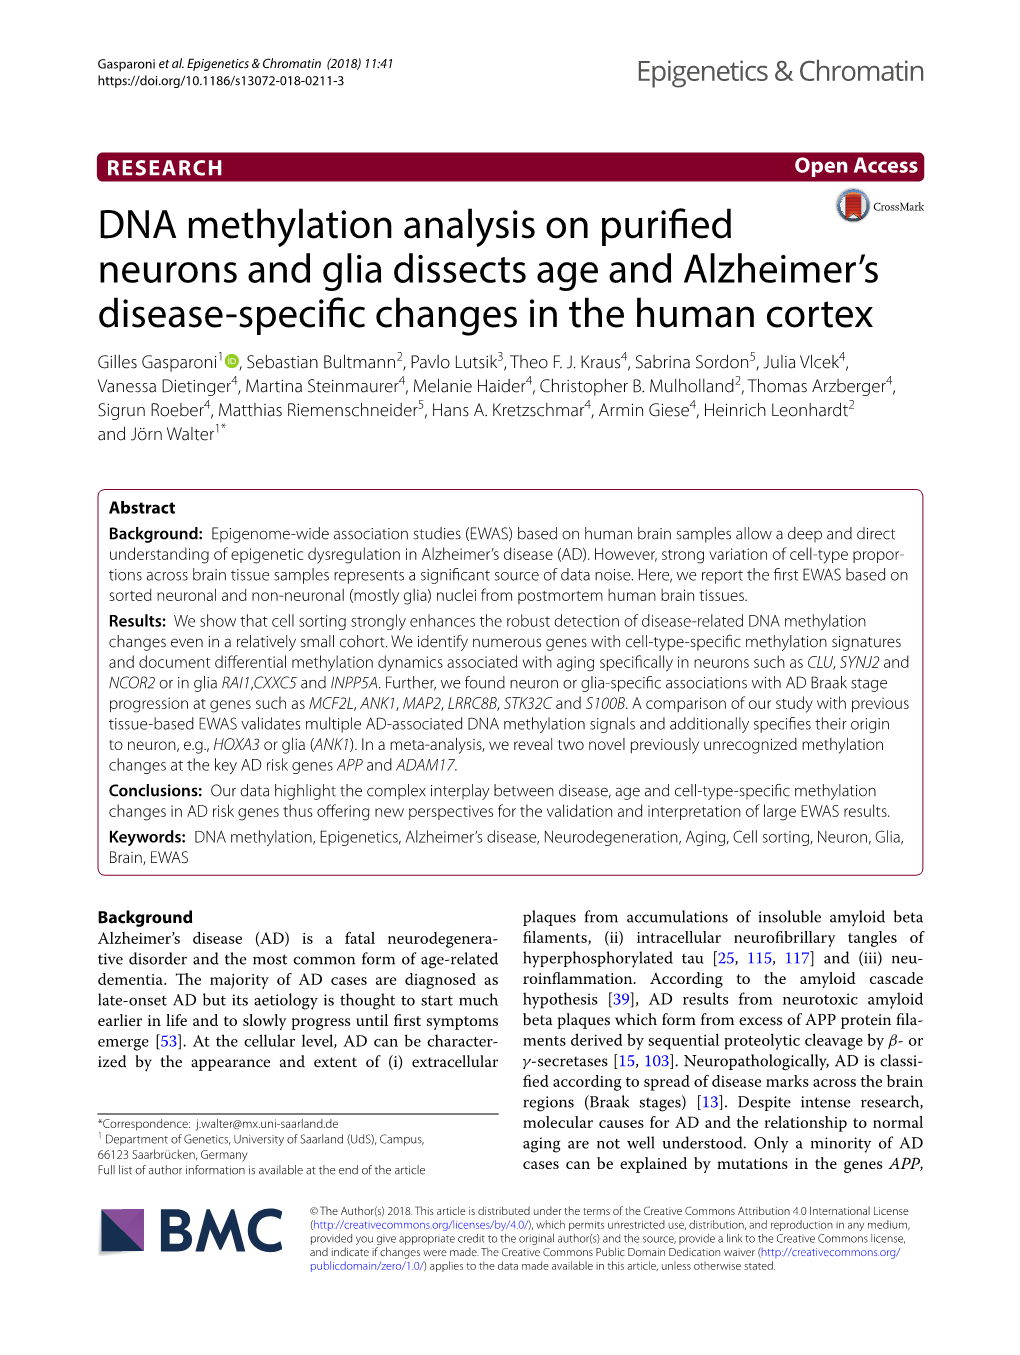 DNA Methylation Analysis on Purified Neurons and Glia Dissects Age And